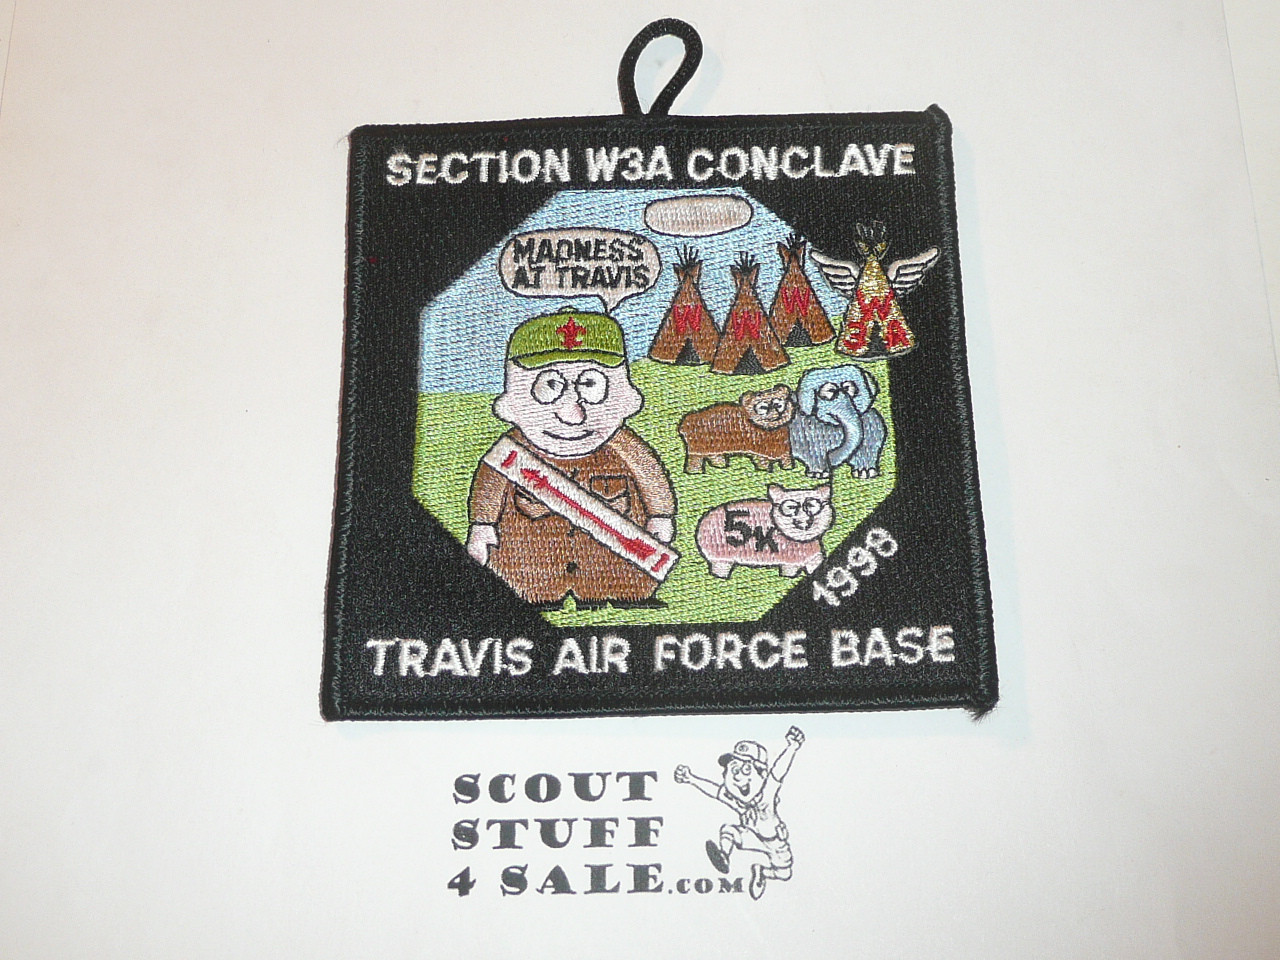 Section W3A 1998 O.A. Conclave Patch with Participation patch applied - Scout